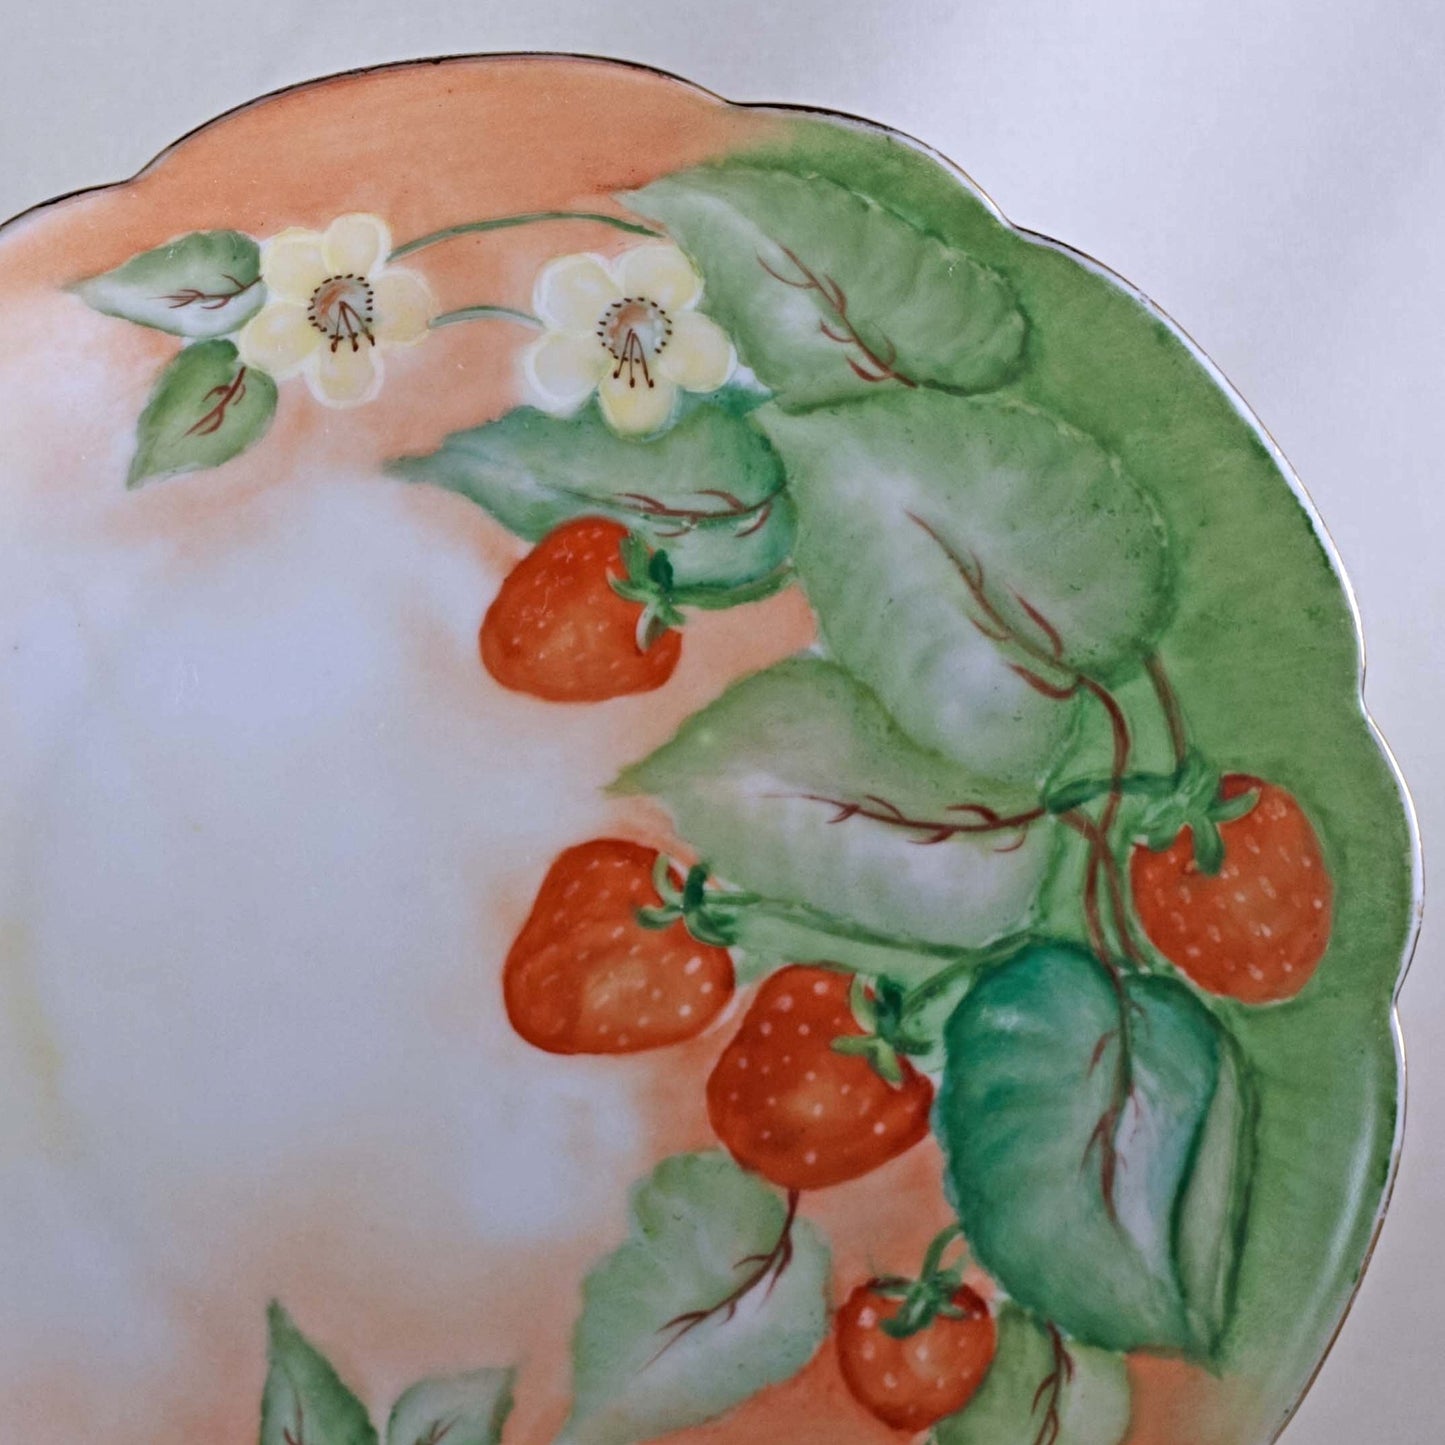 BAVARIA PORCELAIN PLATE Hand Painted with Strawberries and Blossoms Circa 1940s